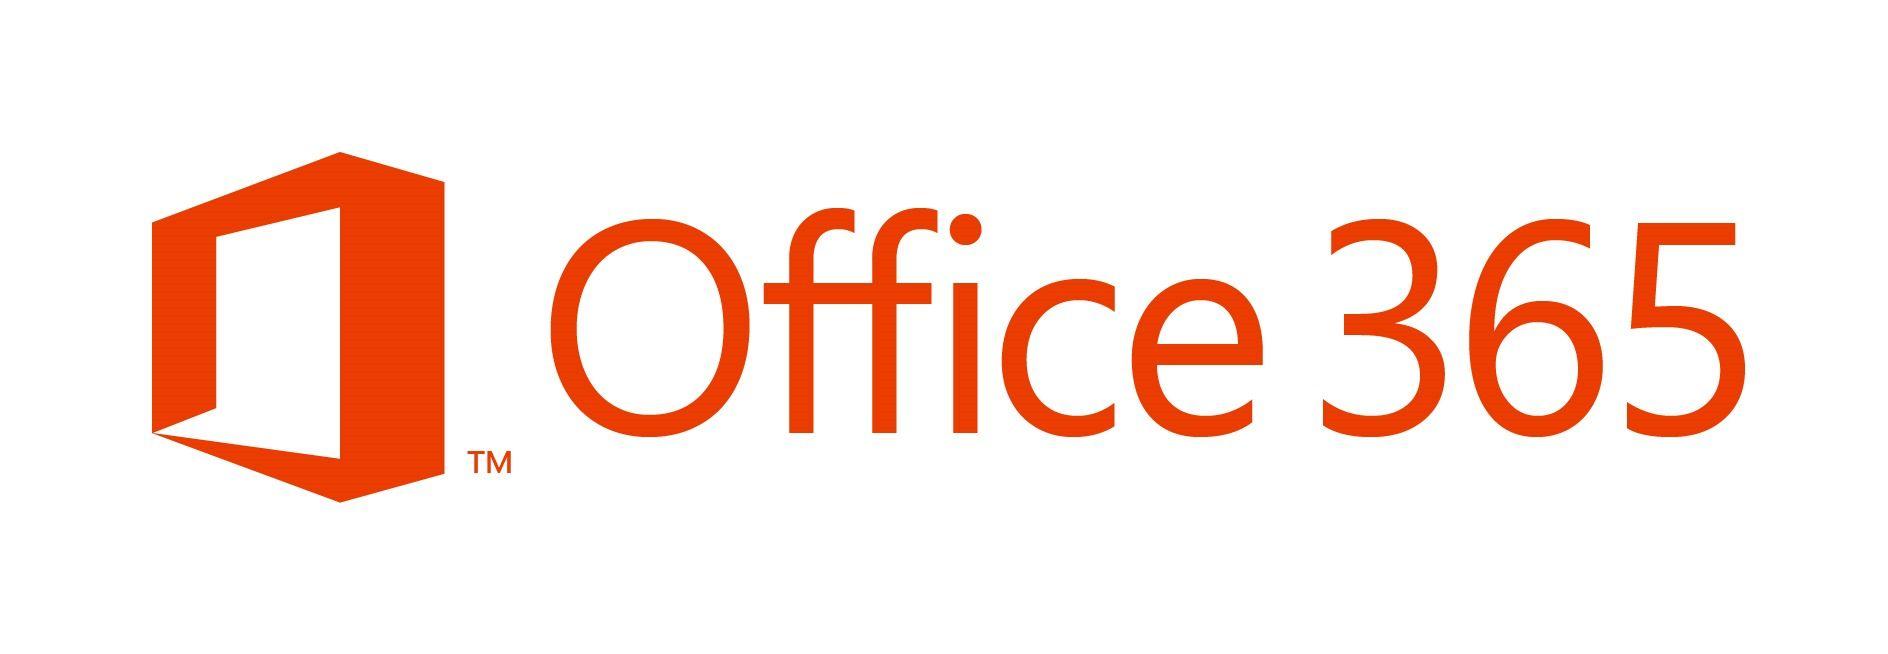 Microsoft Office 365 Team's Logo - Brisbane Cloud Consulting Team Now Offers Microsoft Office 365